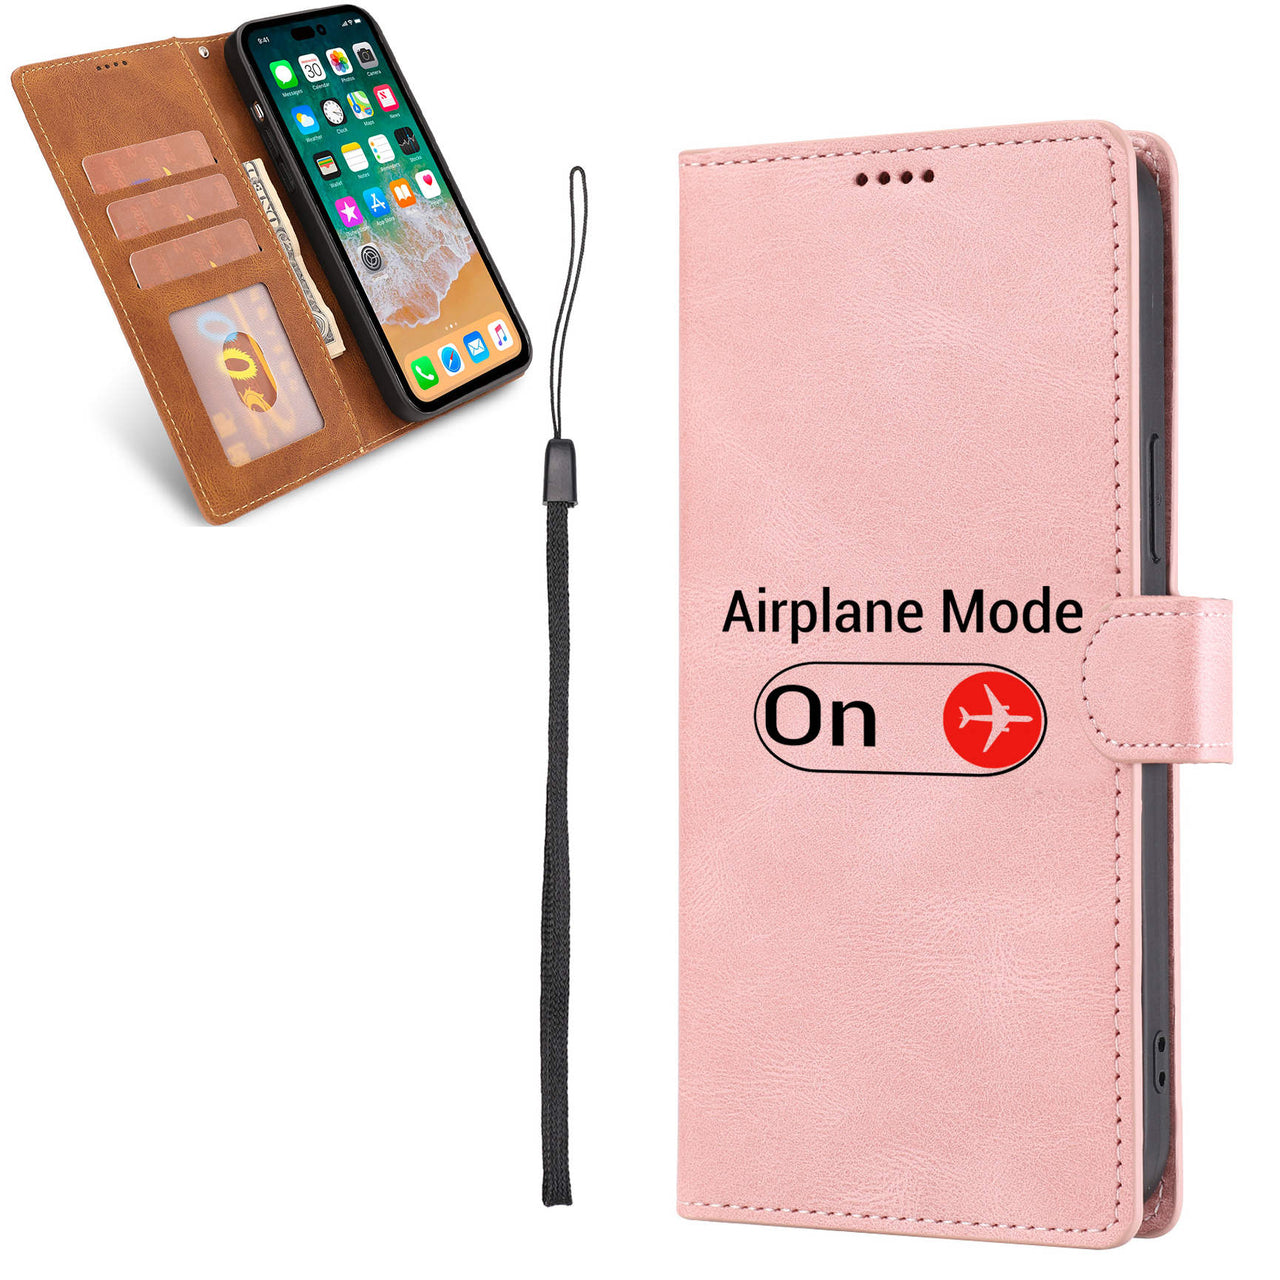 Airplane Mode On Designed Leather iPhone Cases